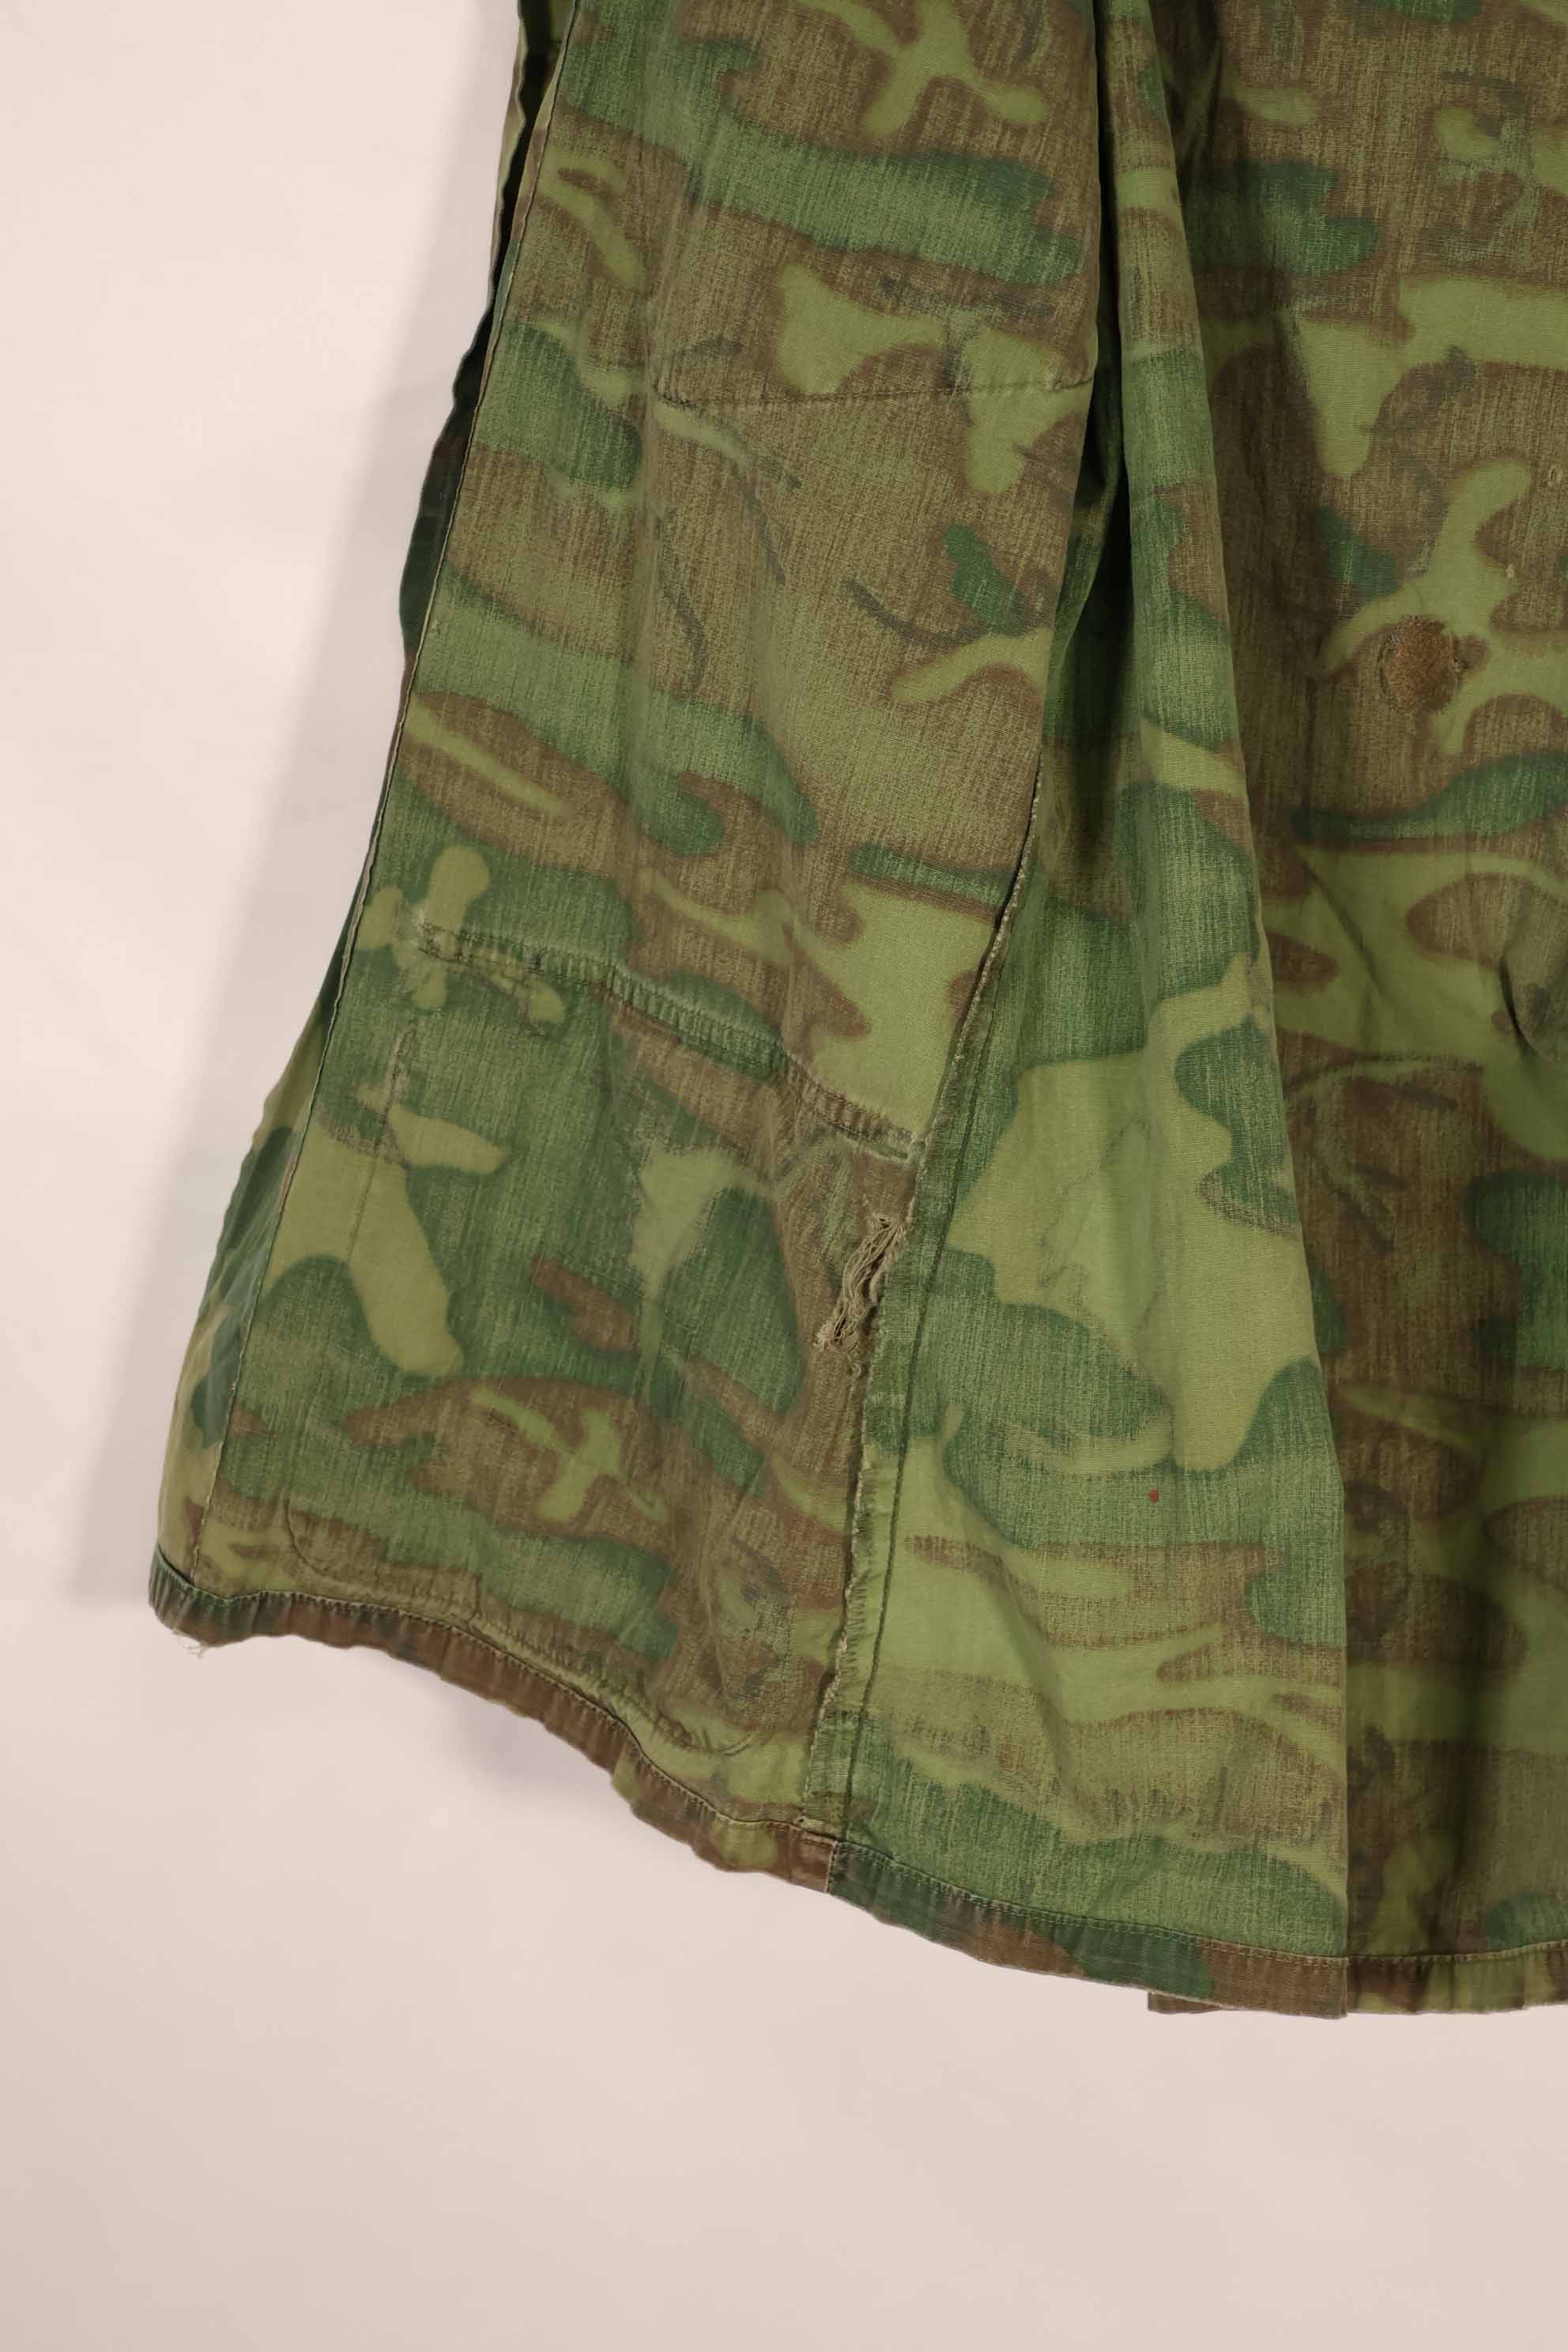 Real non ripstop fabric ERDL jungle fatigues jacket, used, no tags.